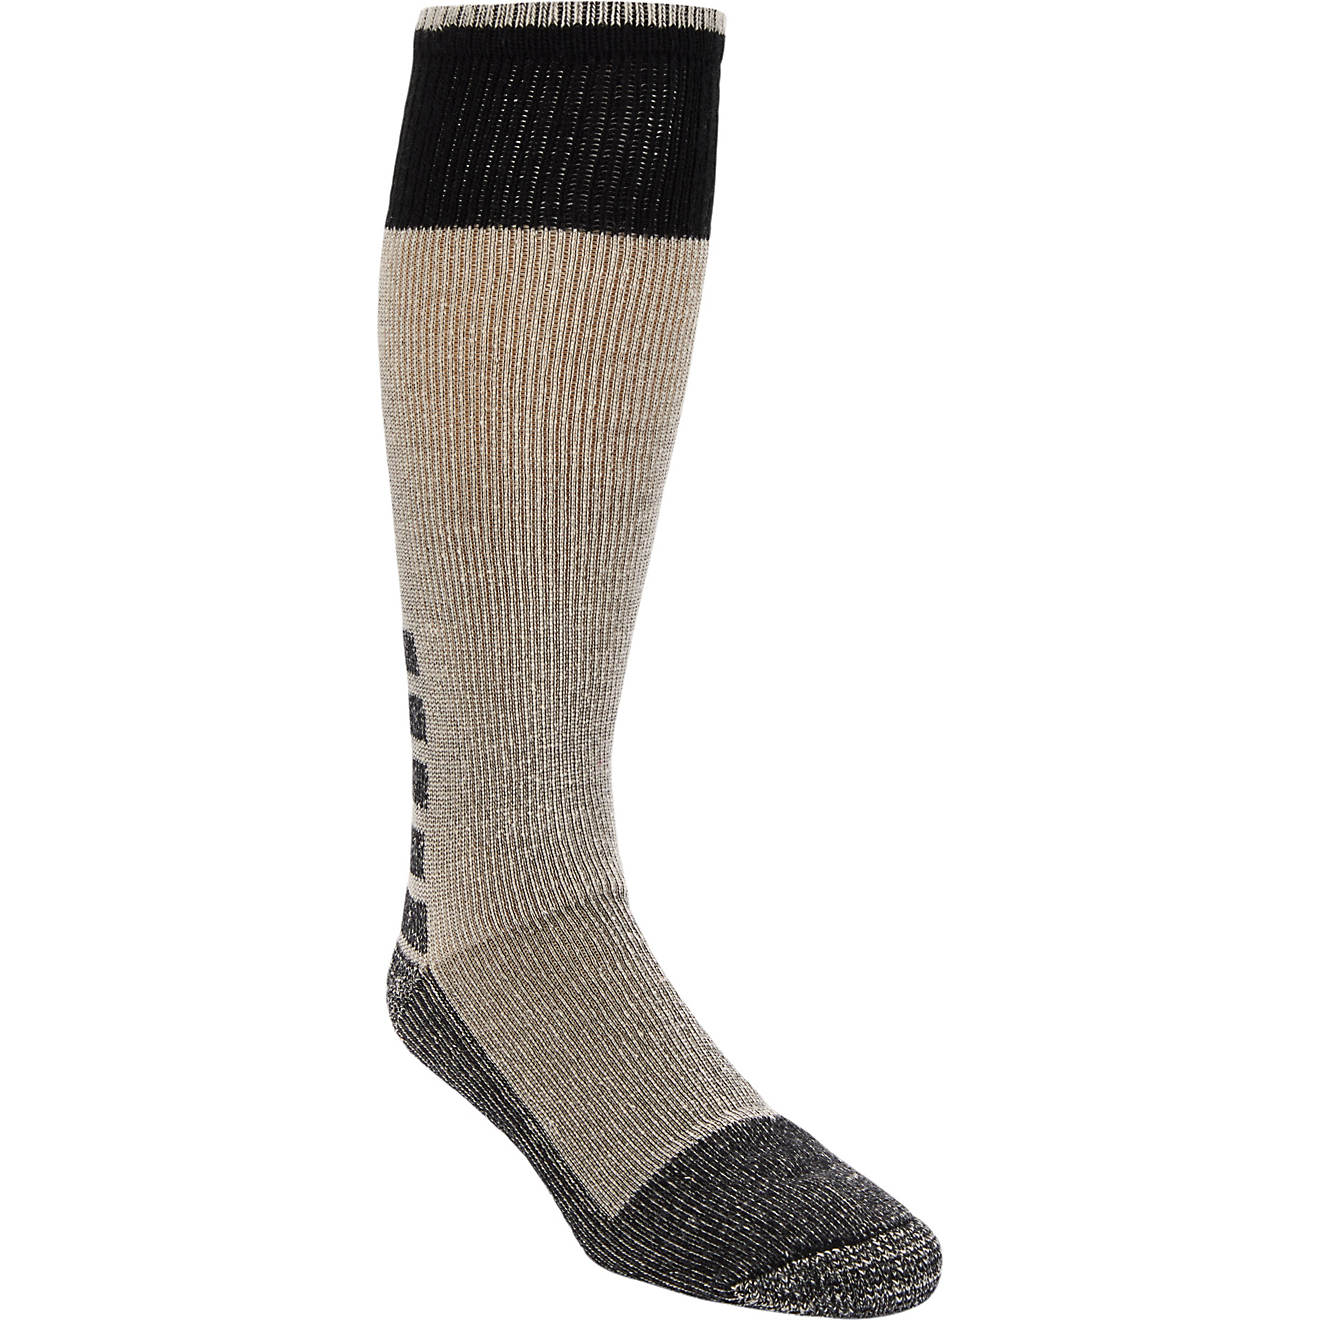 Magellan Men's Heavyweight Thermal Hunting Over The Calf Socks 2 Pack                                                            - view number 1